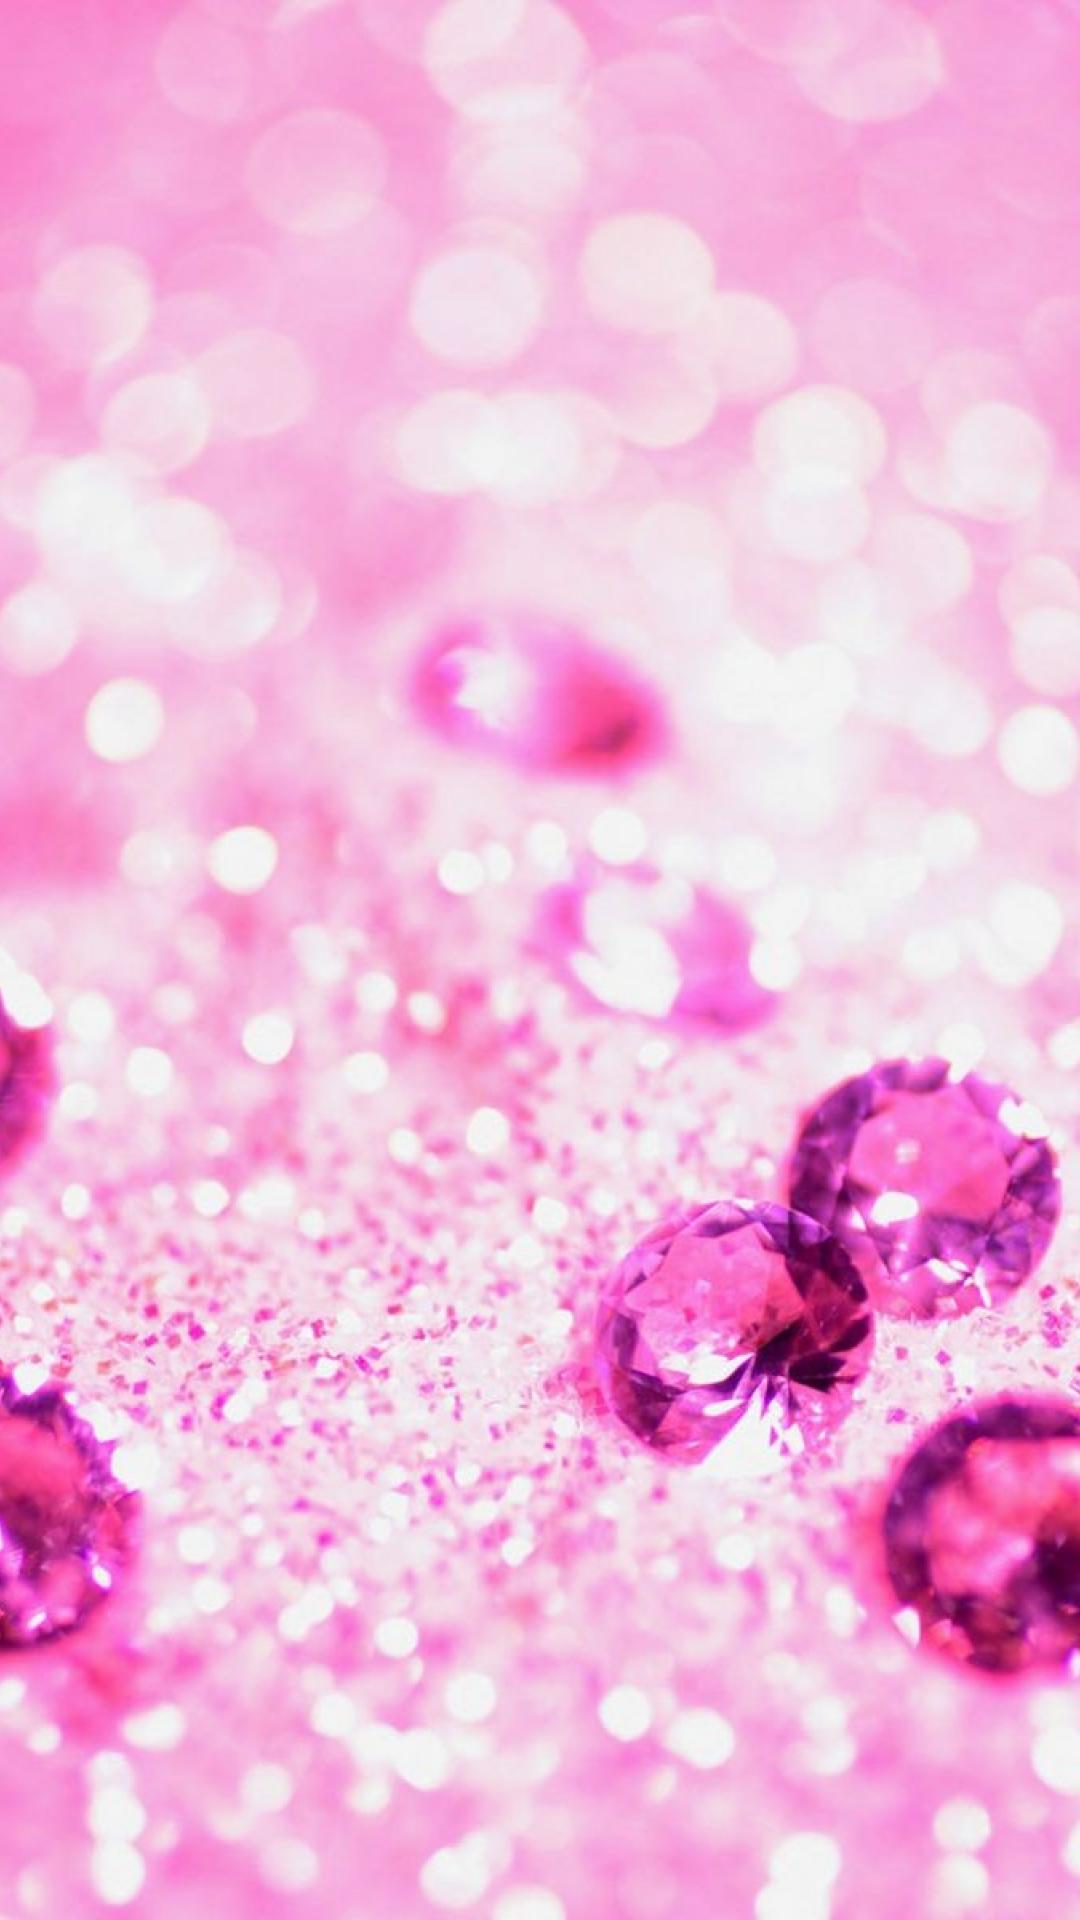 Pink Girly Lock Screen APK for Android Download